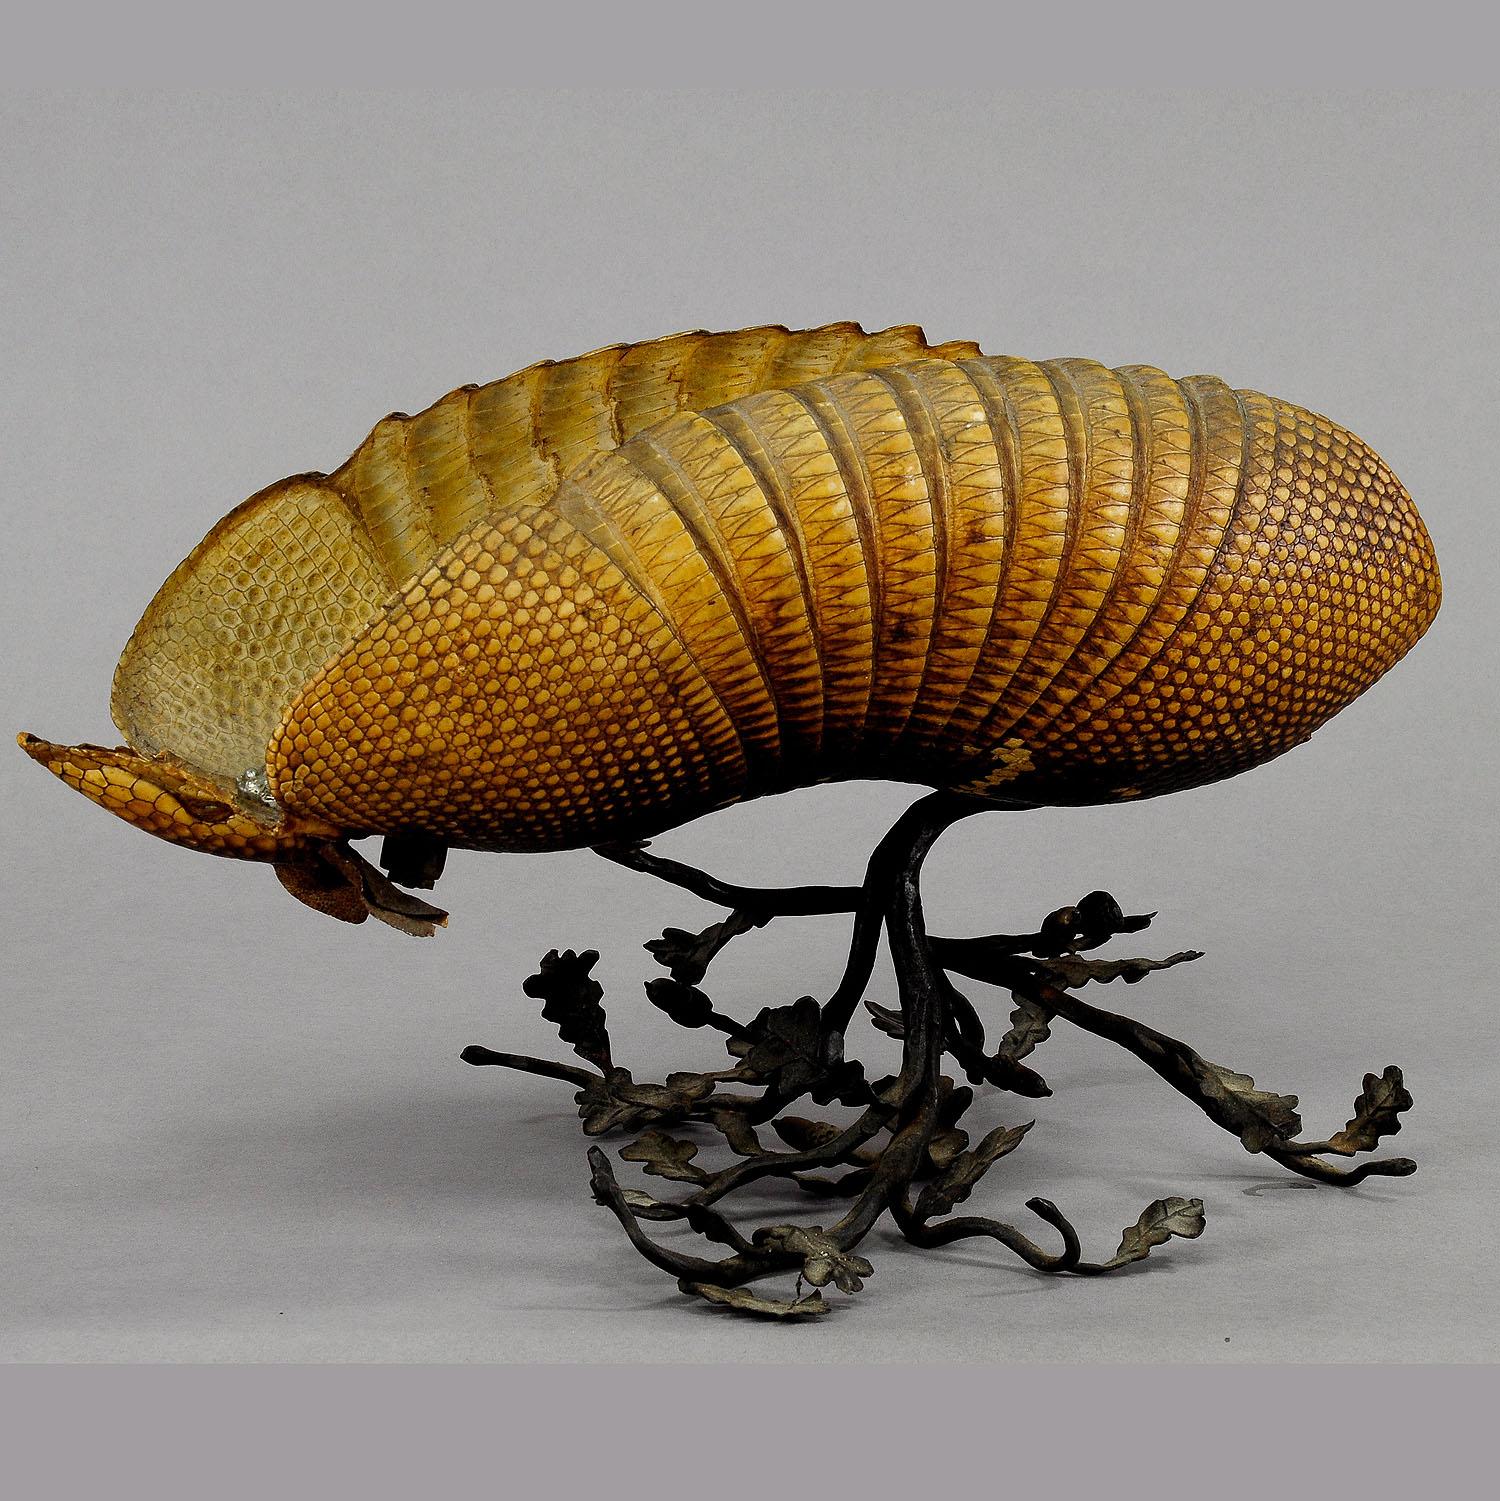 Item e4856
An rare antique bowl made of an armadillo shell mounted on a handforged iron base depicting branches and leaves of the oak tree. inside the bowl two casted brass handles. manufactured circa 1920.

Measures: Length 15.35